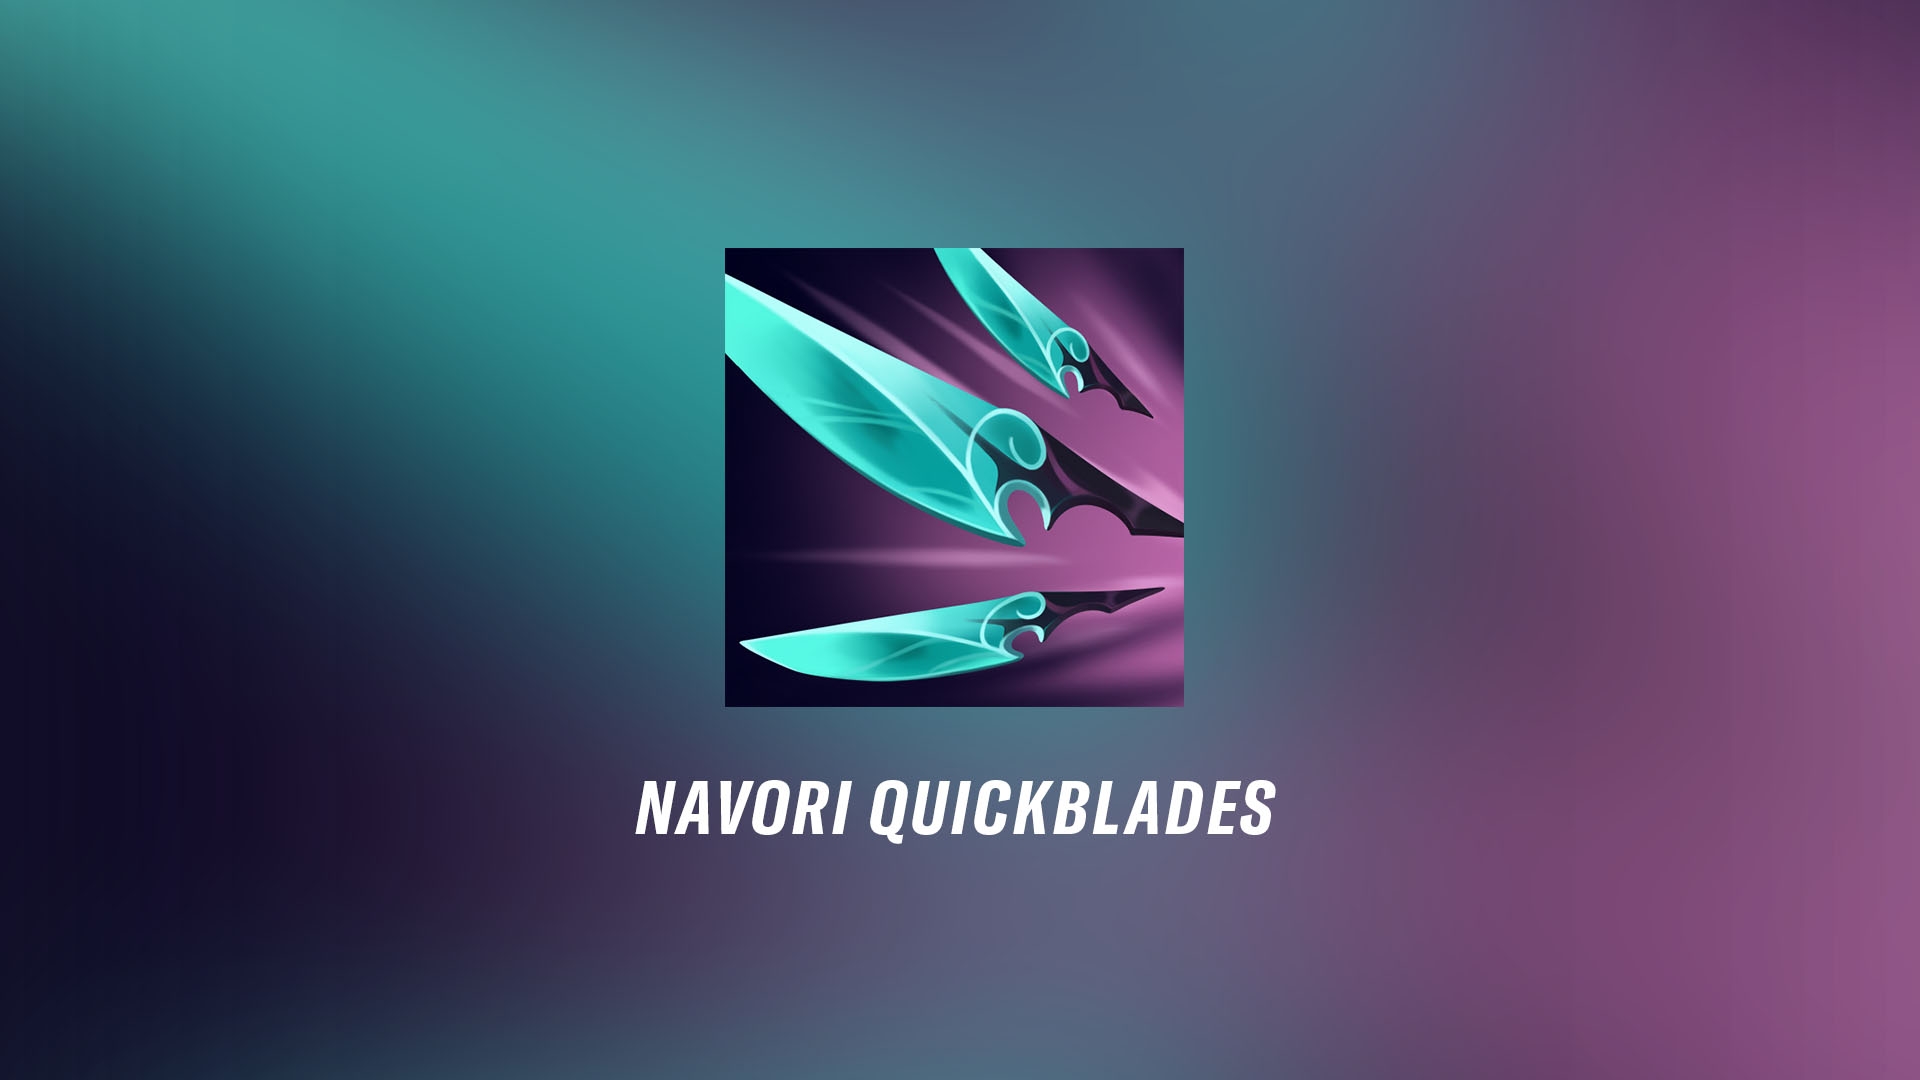 Three navori quickblades in blue color with purple background